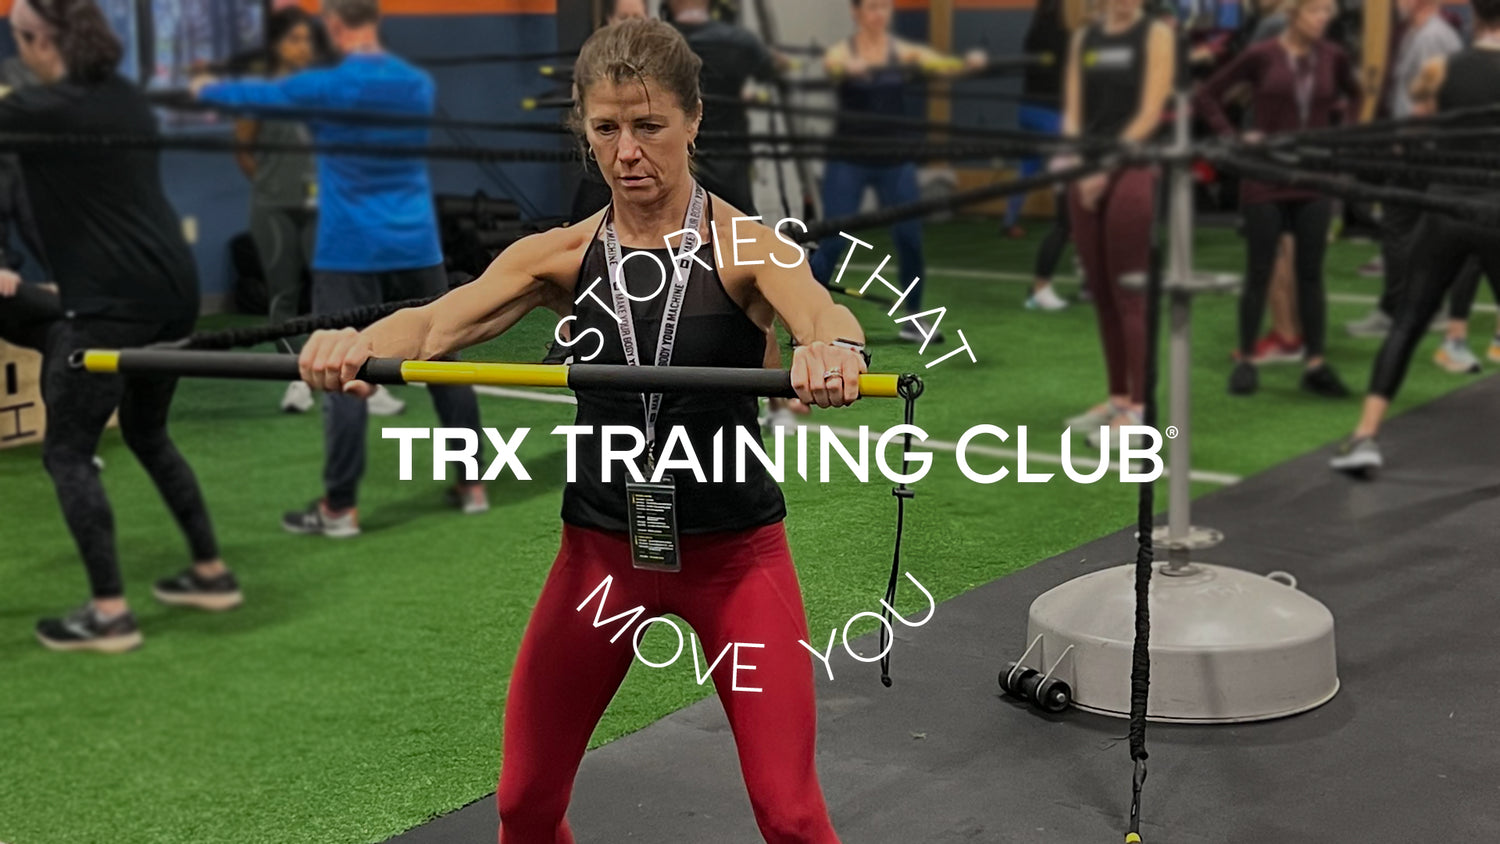 I Tried TRX® For A Week, And I Definitely Felt Stronger By The End